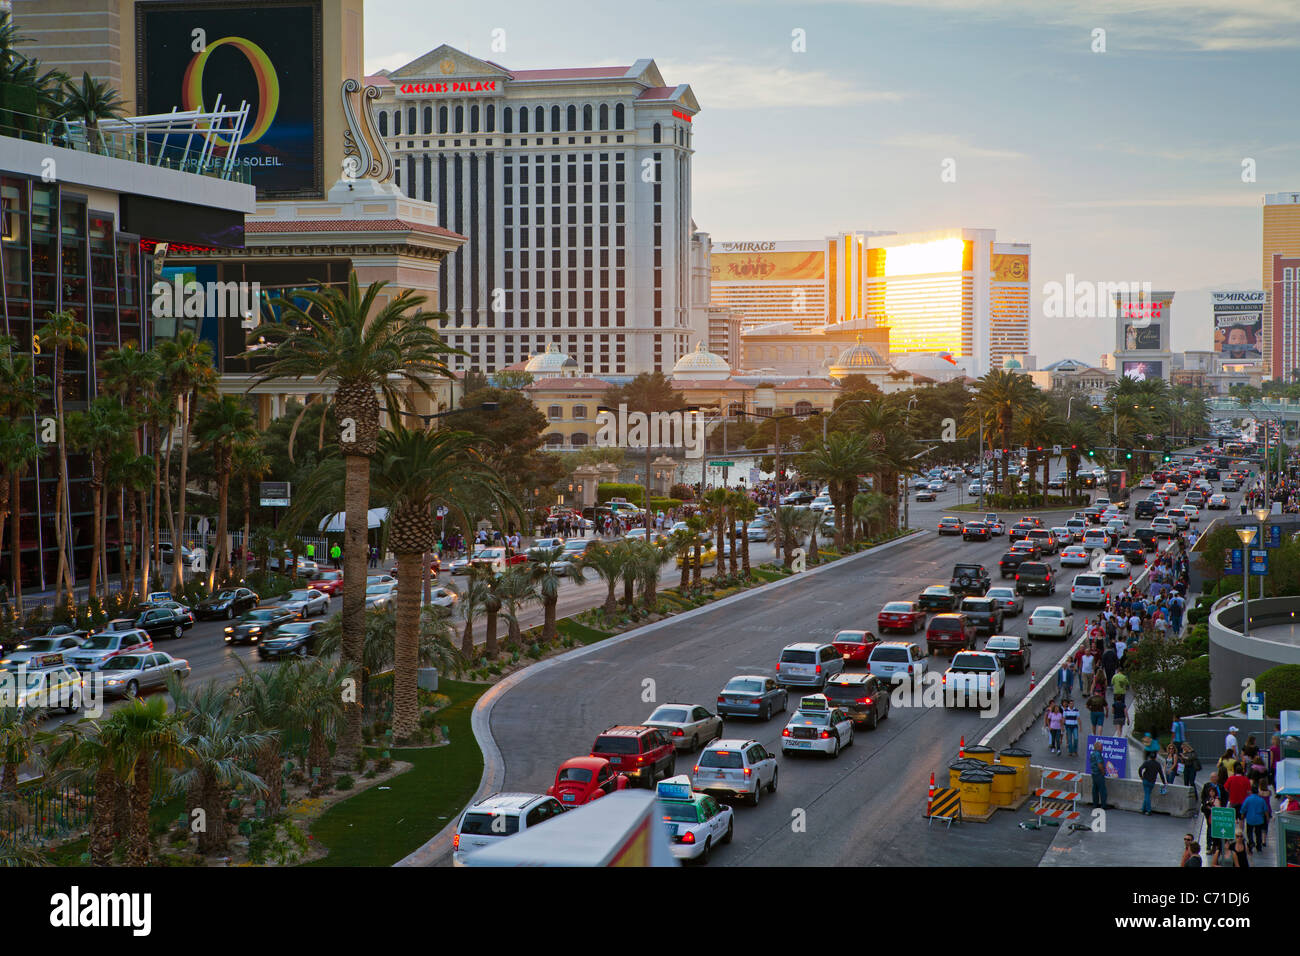 United States of America, Nevada, Las Vegas, Hotels and Casinos along the Strip Stock Photo